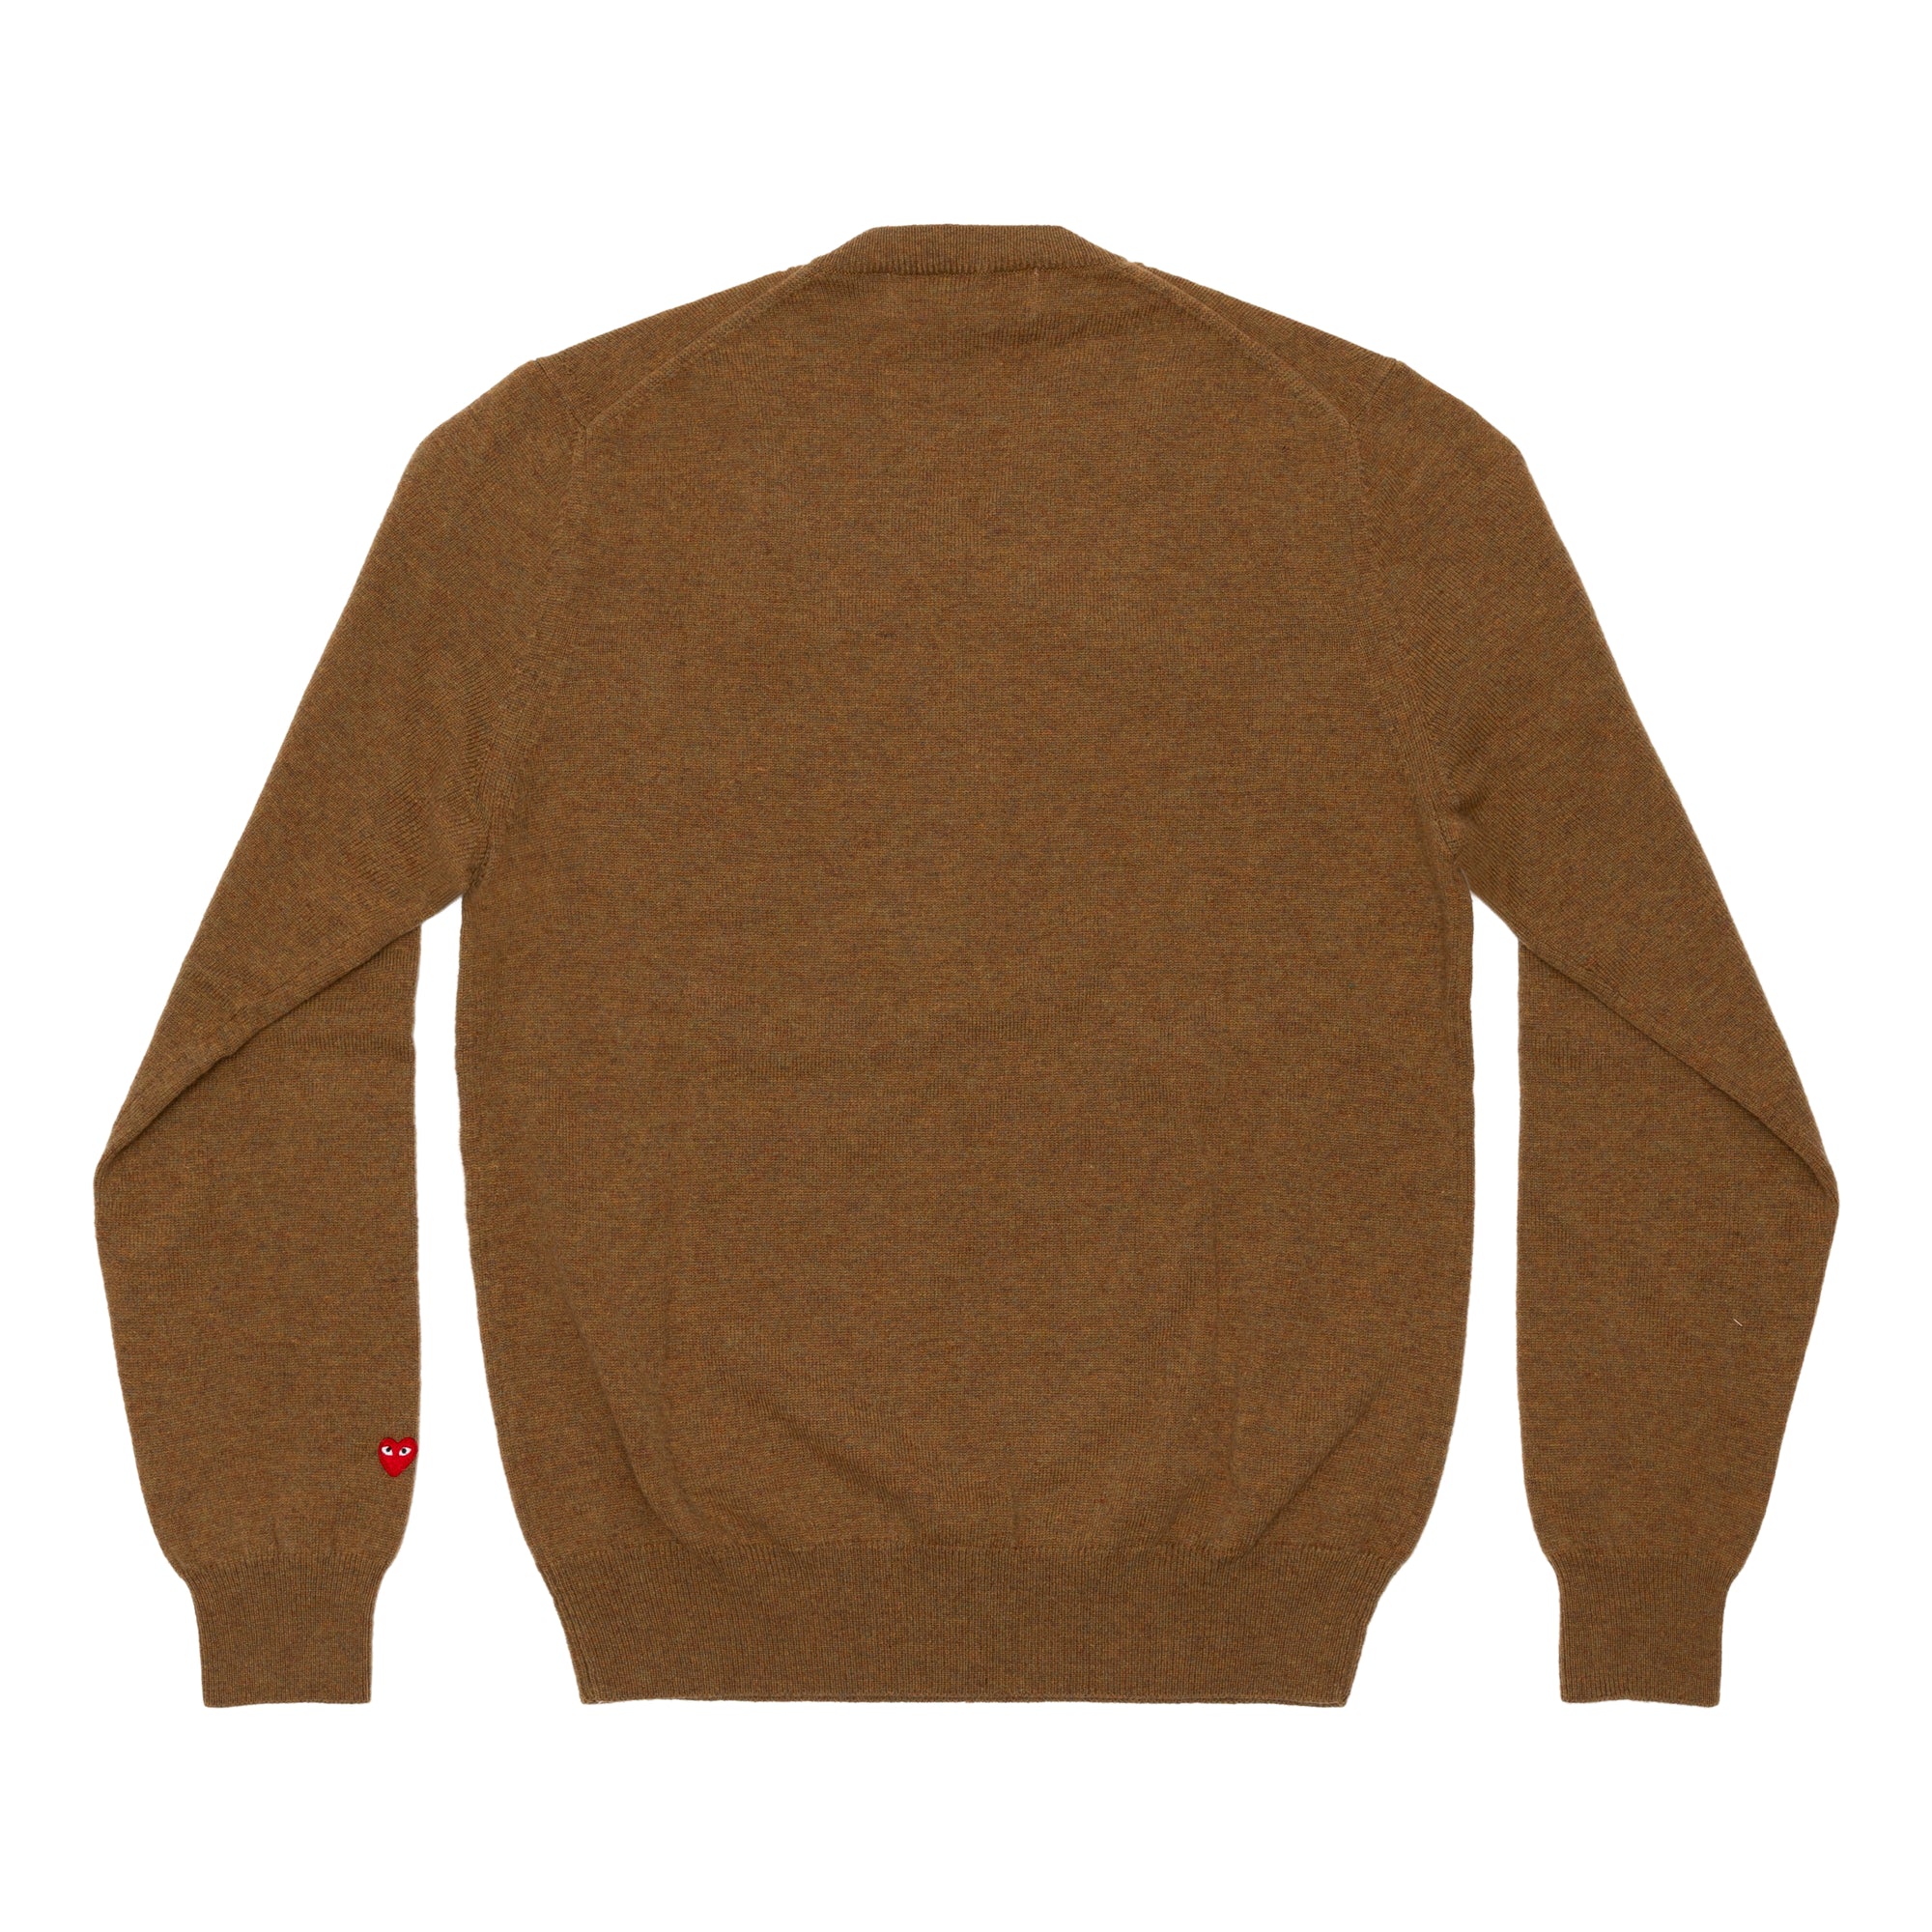 PLAY CDG  - Top Dyed Carded Lambswool V Neck Sweater - (Brown) view 2